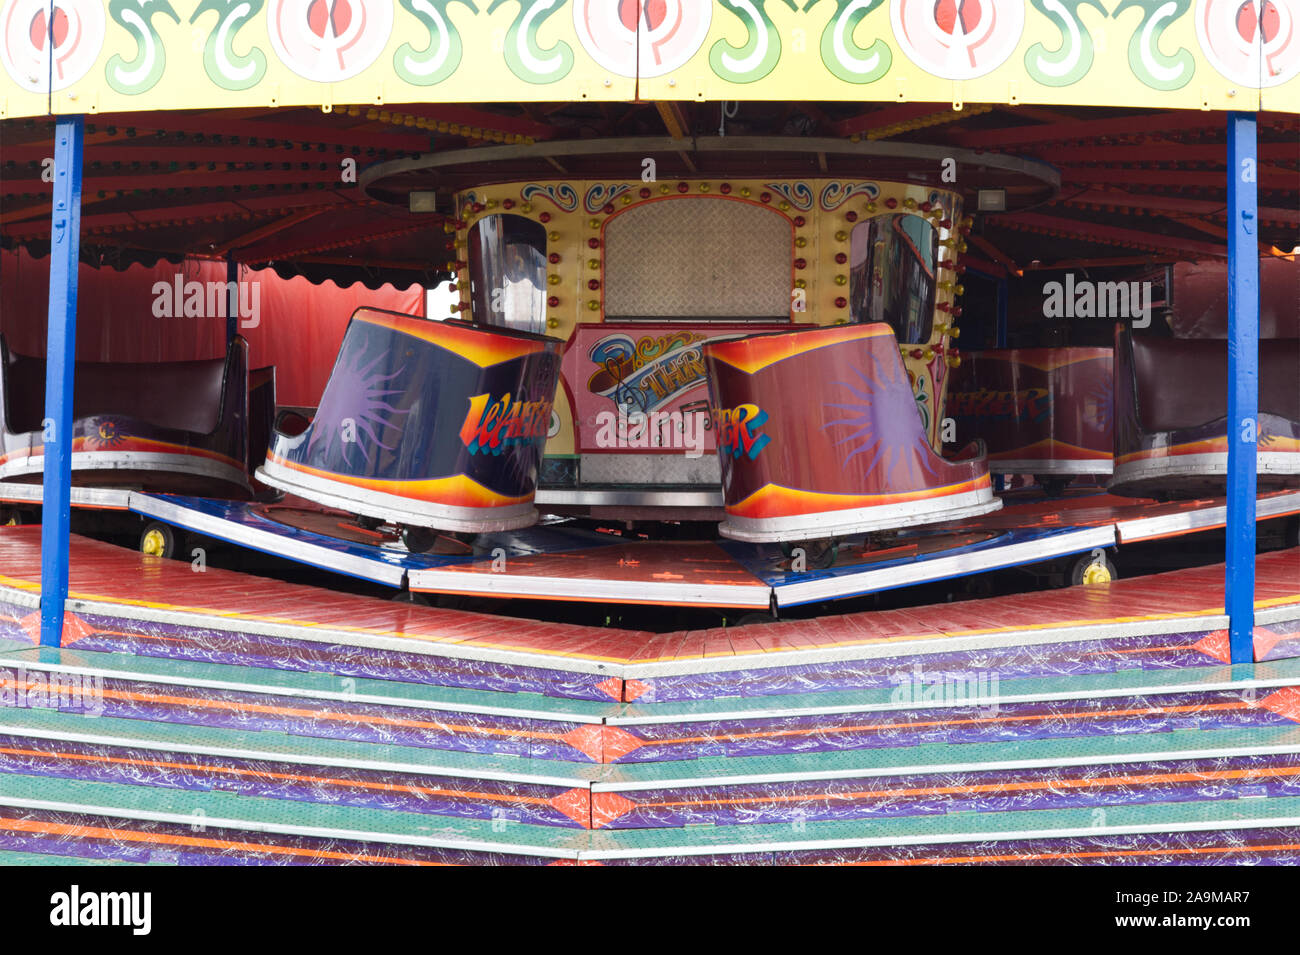 fairground ride the Waltzer on the beach at Great Yarmouth Stock Photo